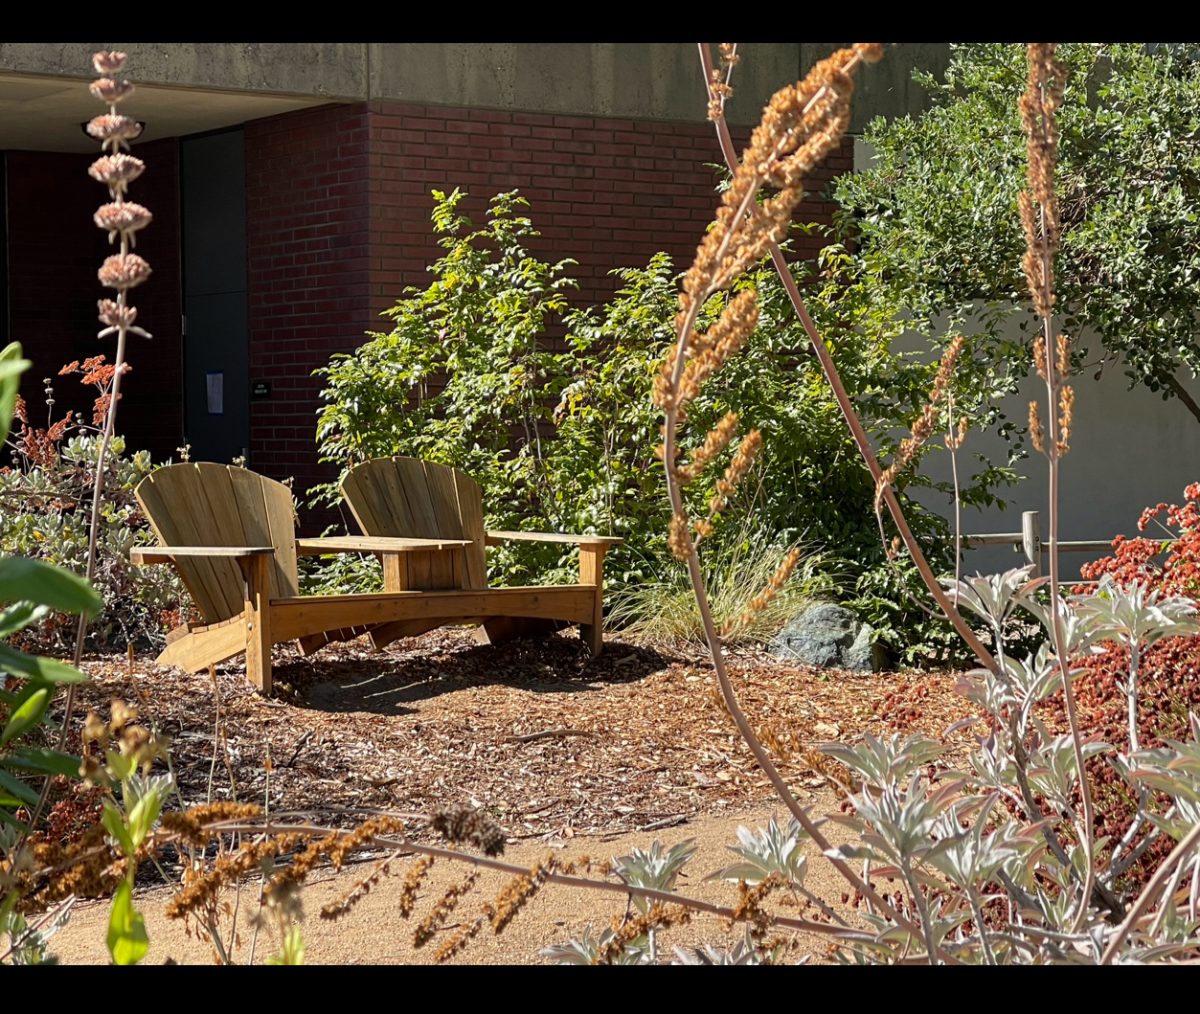 The California Native Plant Garden is near the Science Building and home to over 25 species of plants. The garden was remodeled in 2010 and has over 200 plants installed.